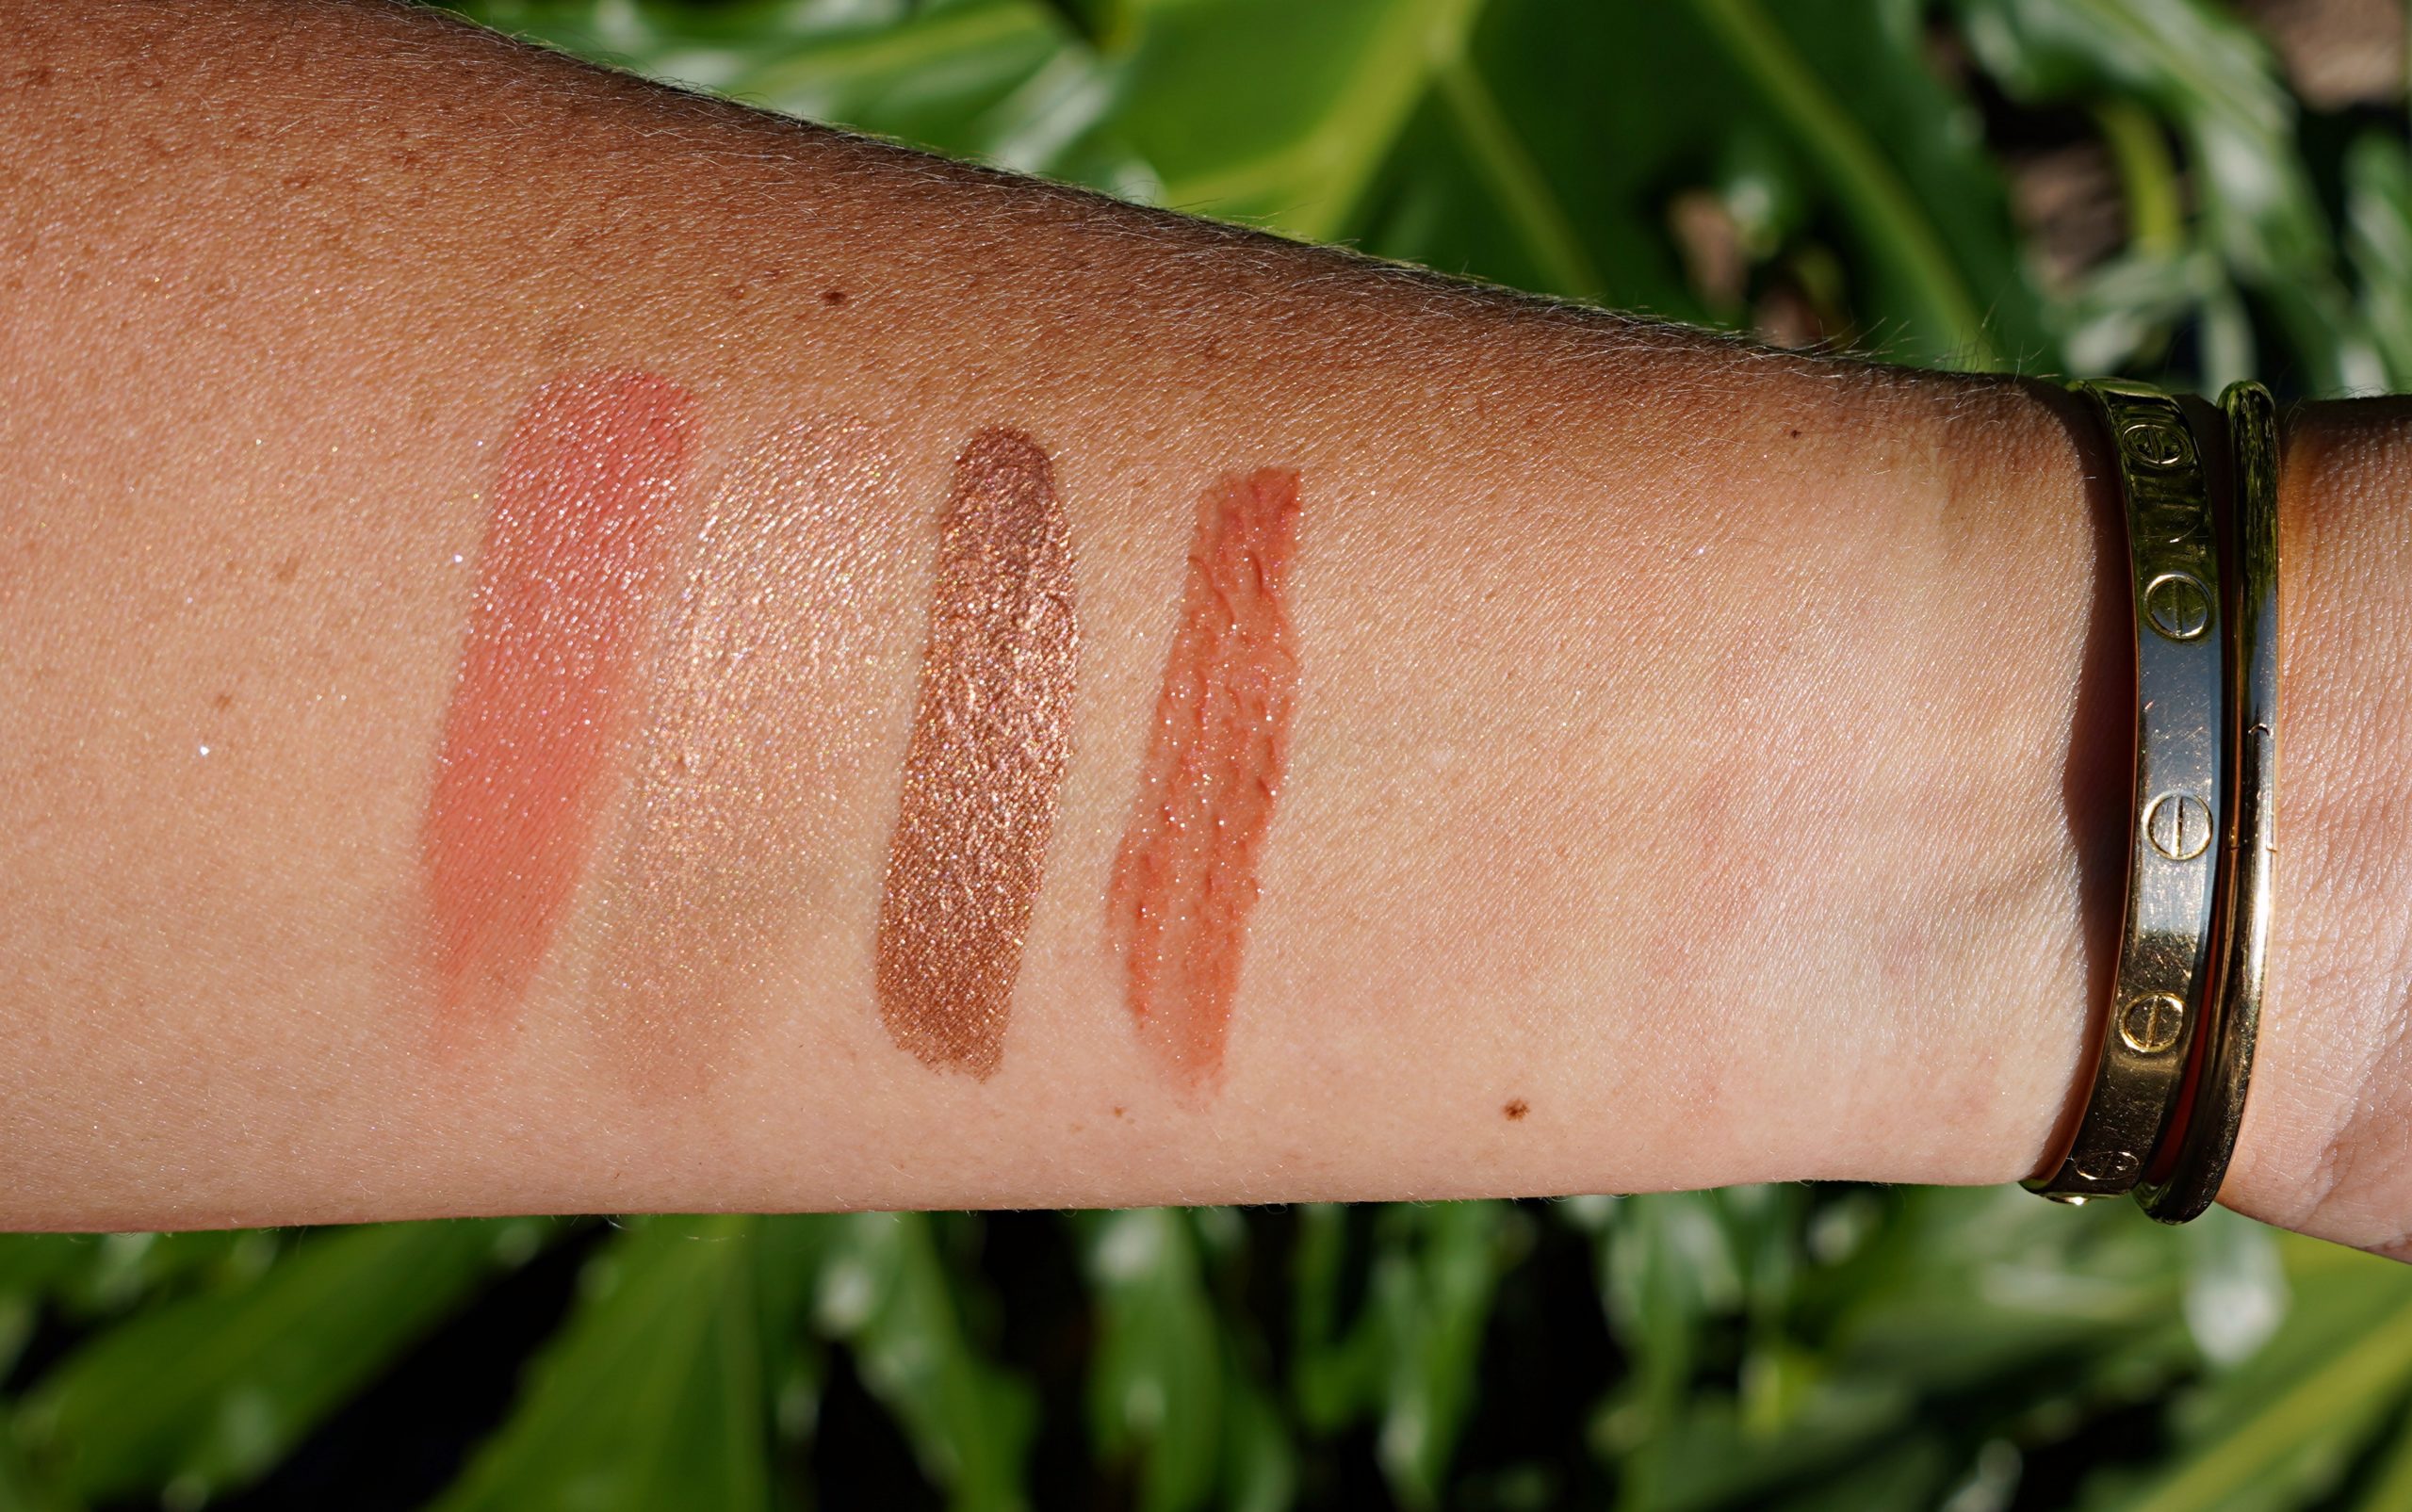 Swatches of the Kosas Ready in 5 Set in direct sunlight